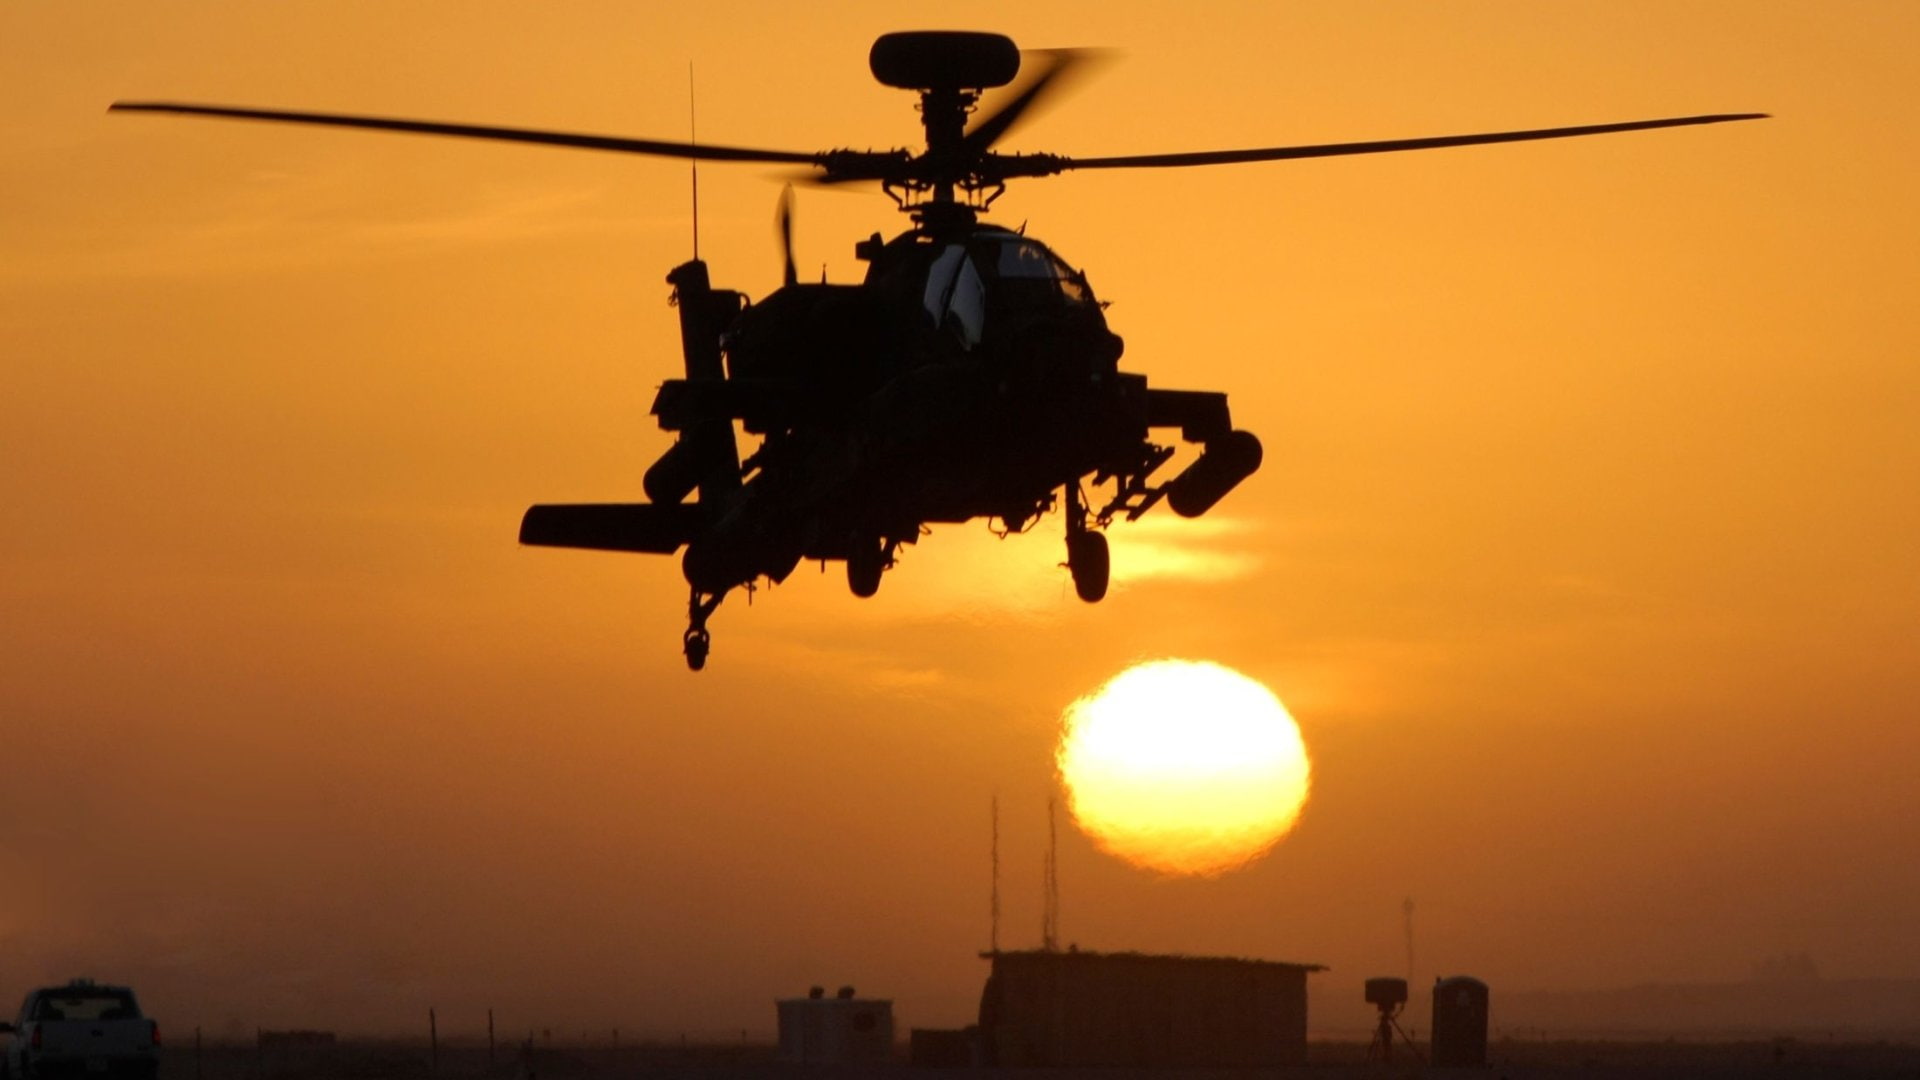 Military Helicopters, Boeing Ah-64 Apache